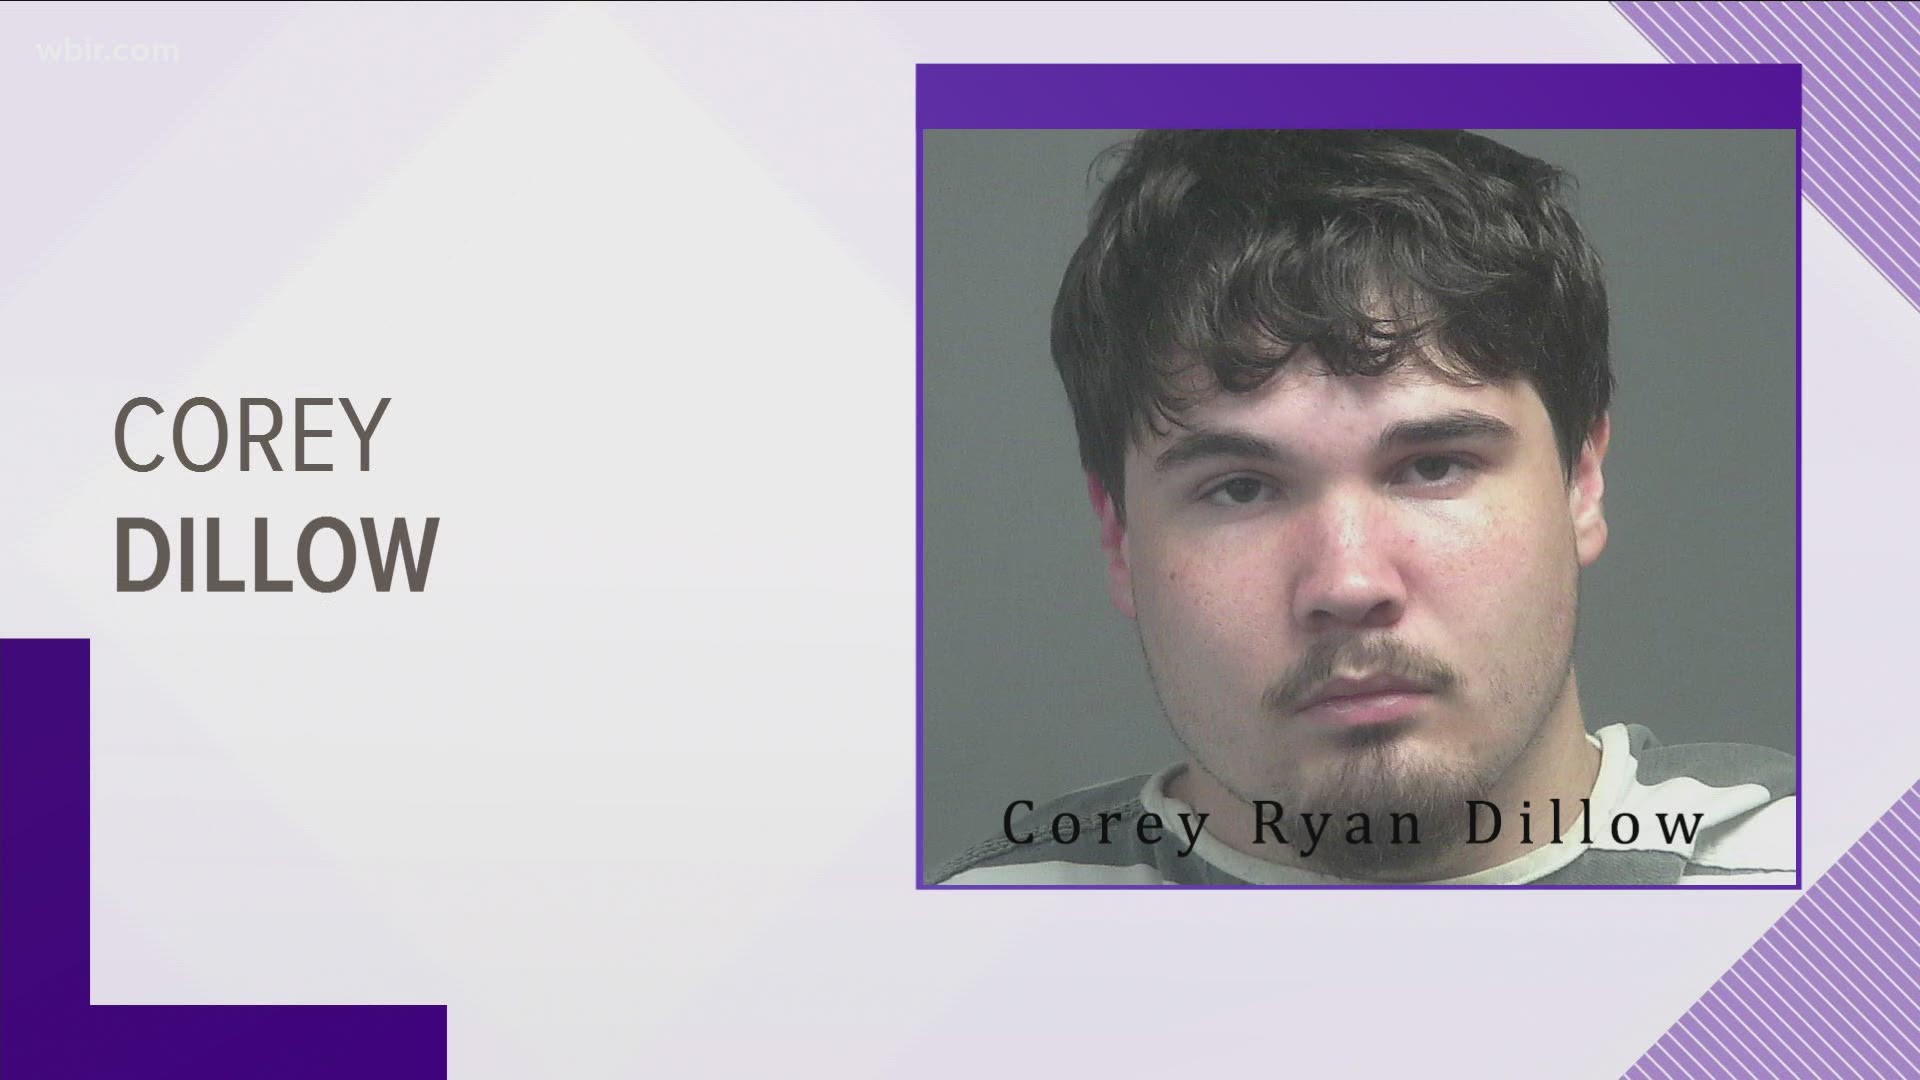 Corey Dillow, 18, is charged with criminal homicide and aggravated child abuse.